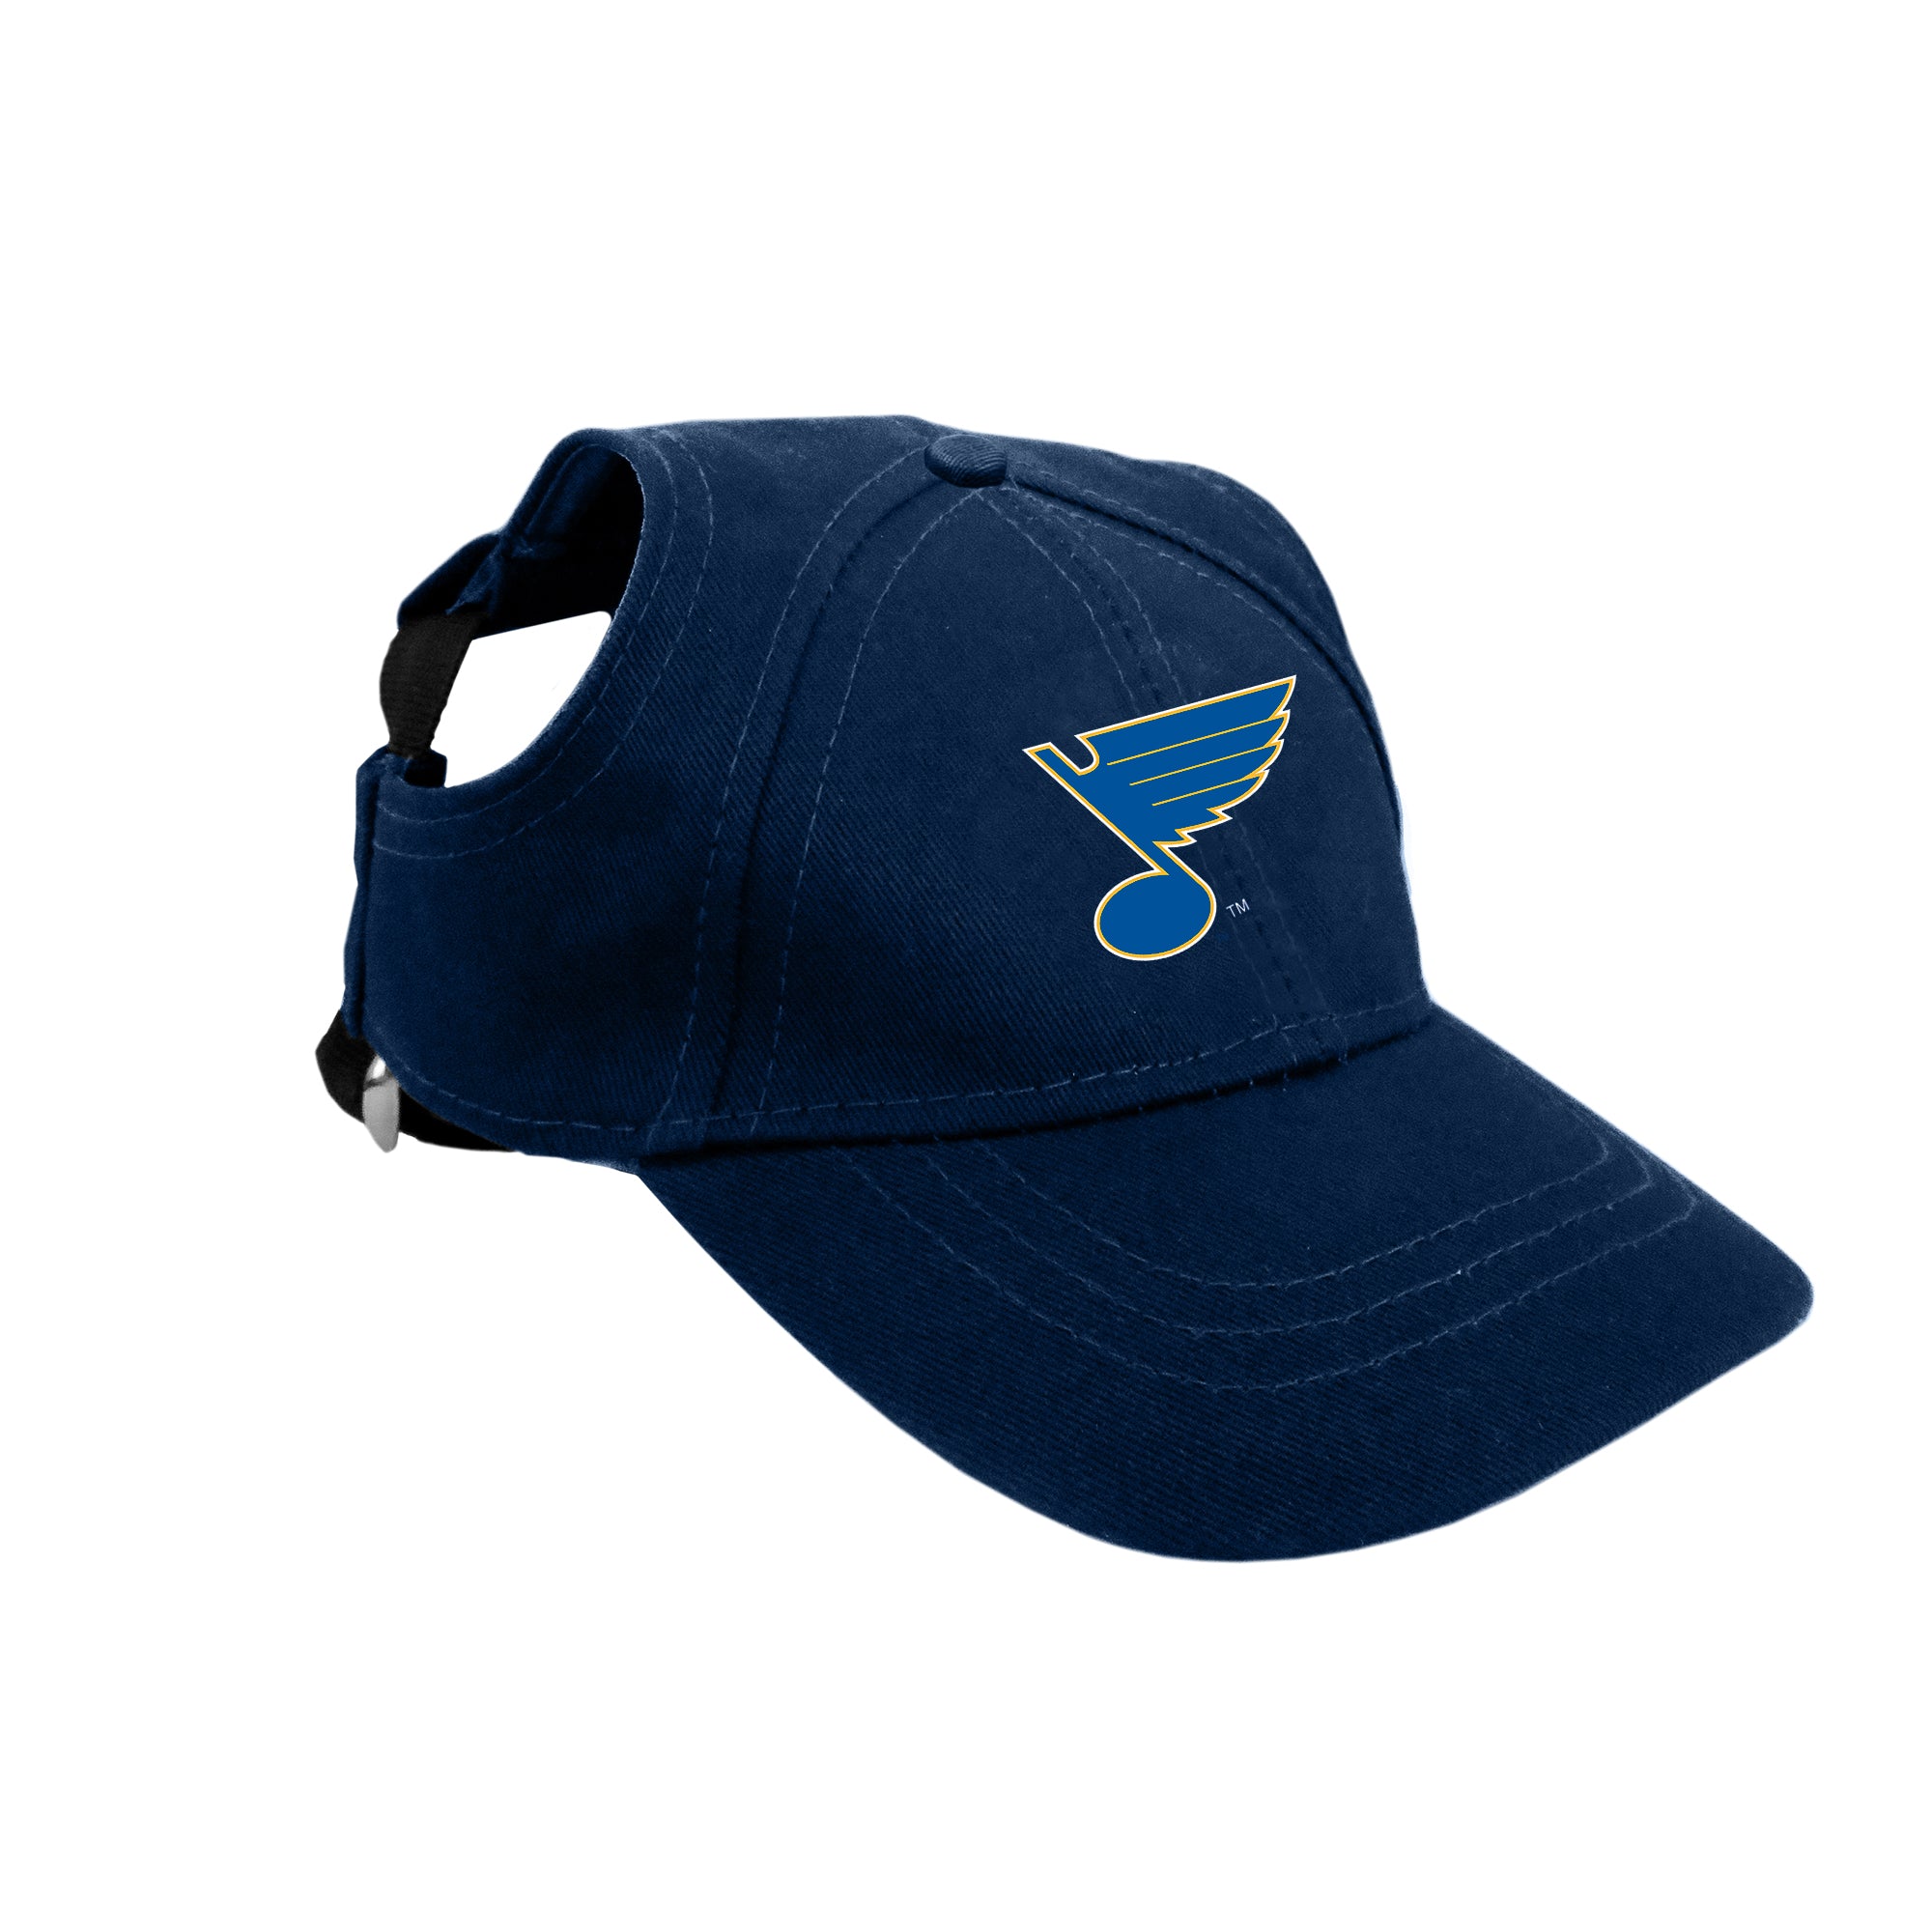 St. Louis Blues Hat/ Blues Hat/embroidered Blues Hat/ Play 